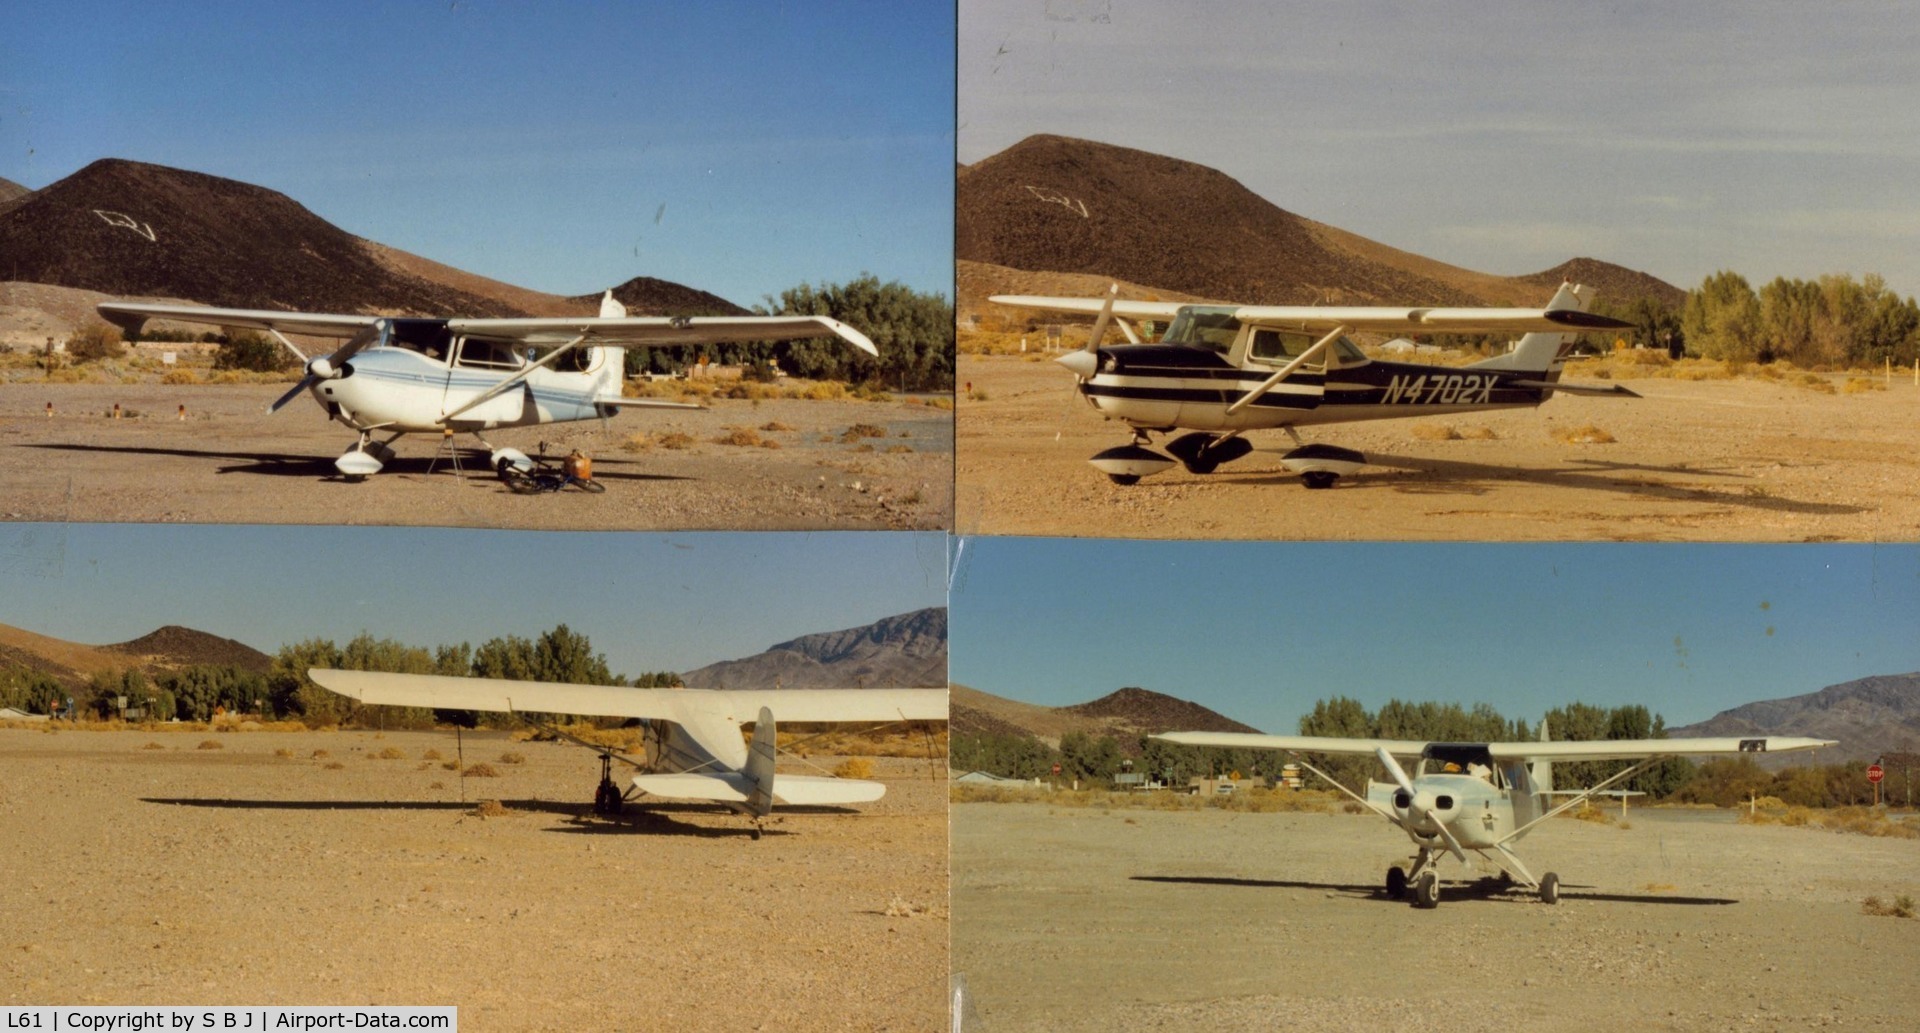 Shoshone Airport (L61) - Some of my many stops at L61.In the 70s,arrivals were always greeted by a local resident.While not a pilot,he liked talking about airplanes.Missed him when it stopped in the 80s.Nice stop for lunch,gas,ice etc.